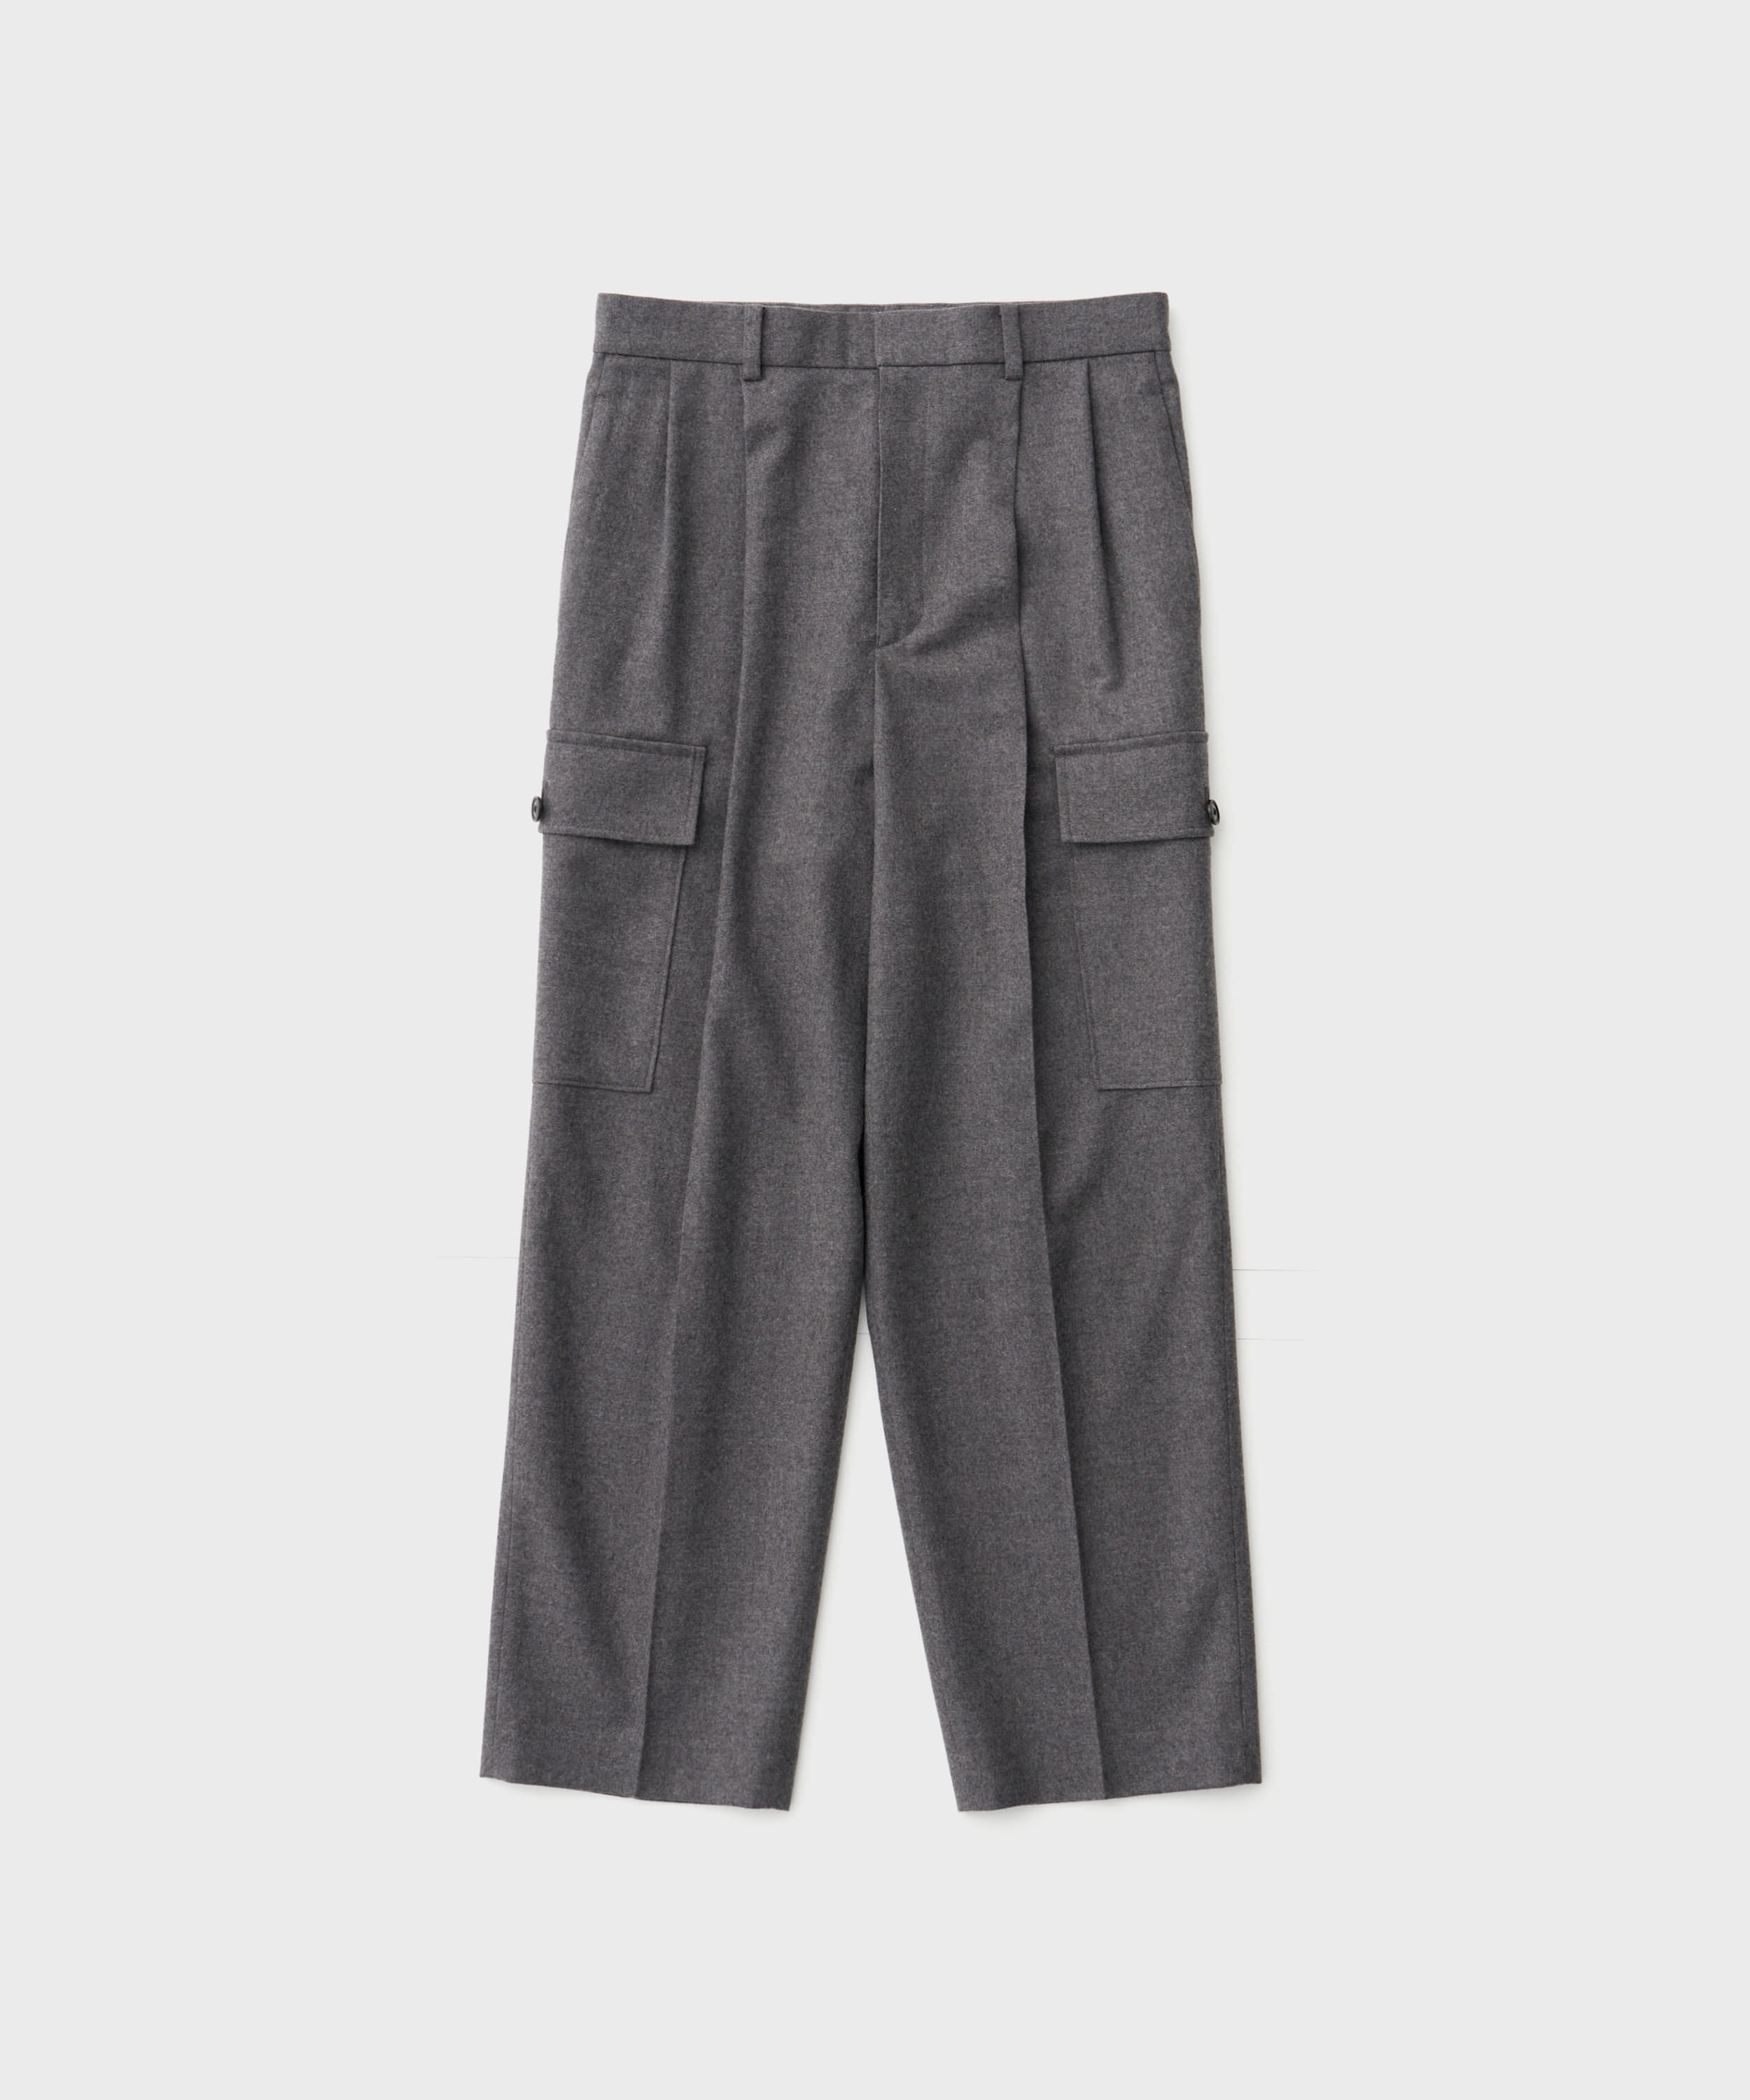 W Flannel Military Trousers (MD.Gray)